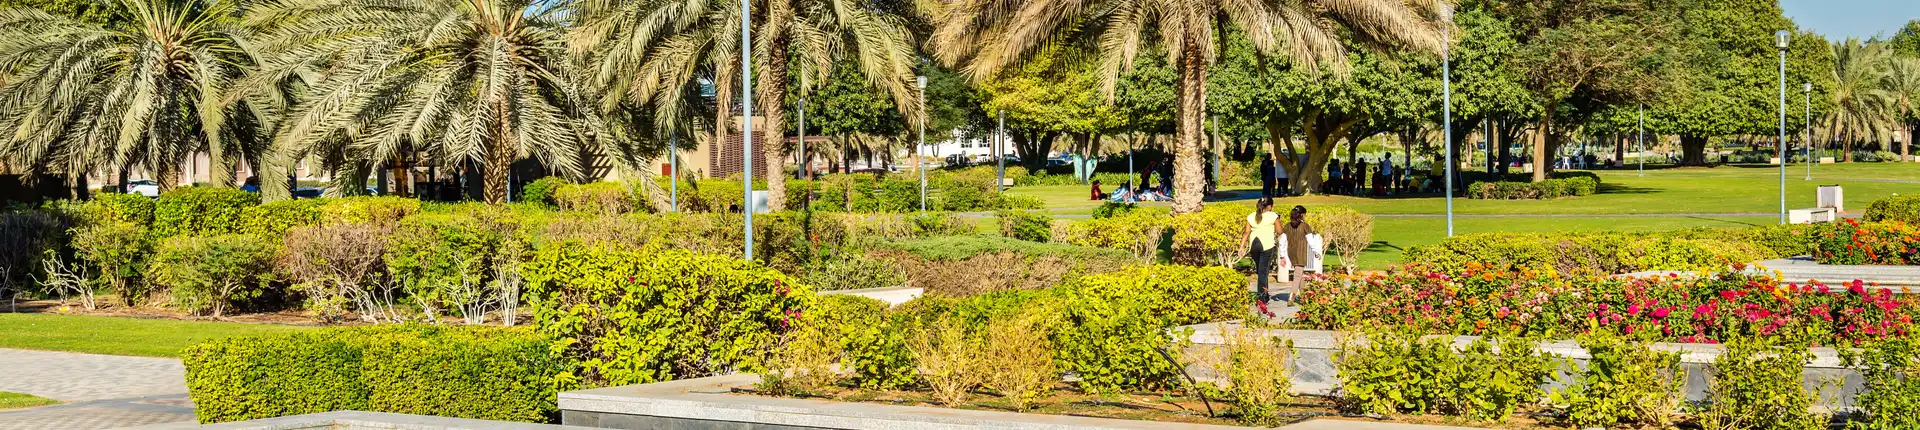 Top 15 Things to Do in Al Ain